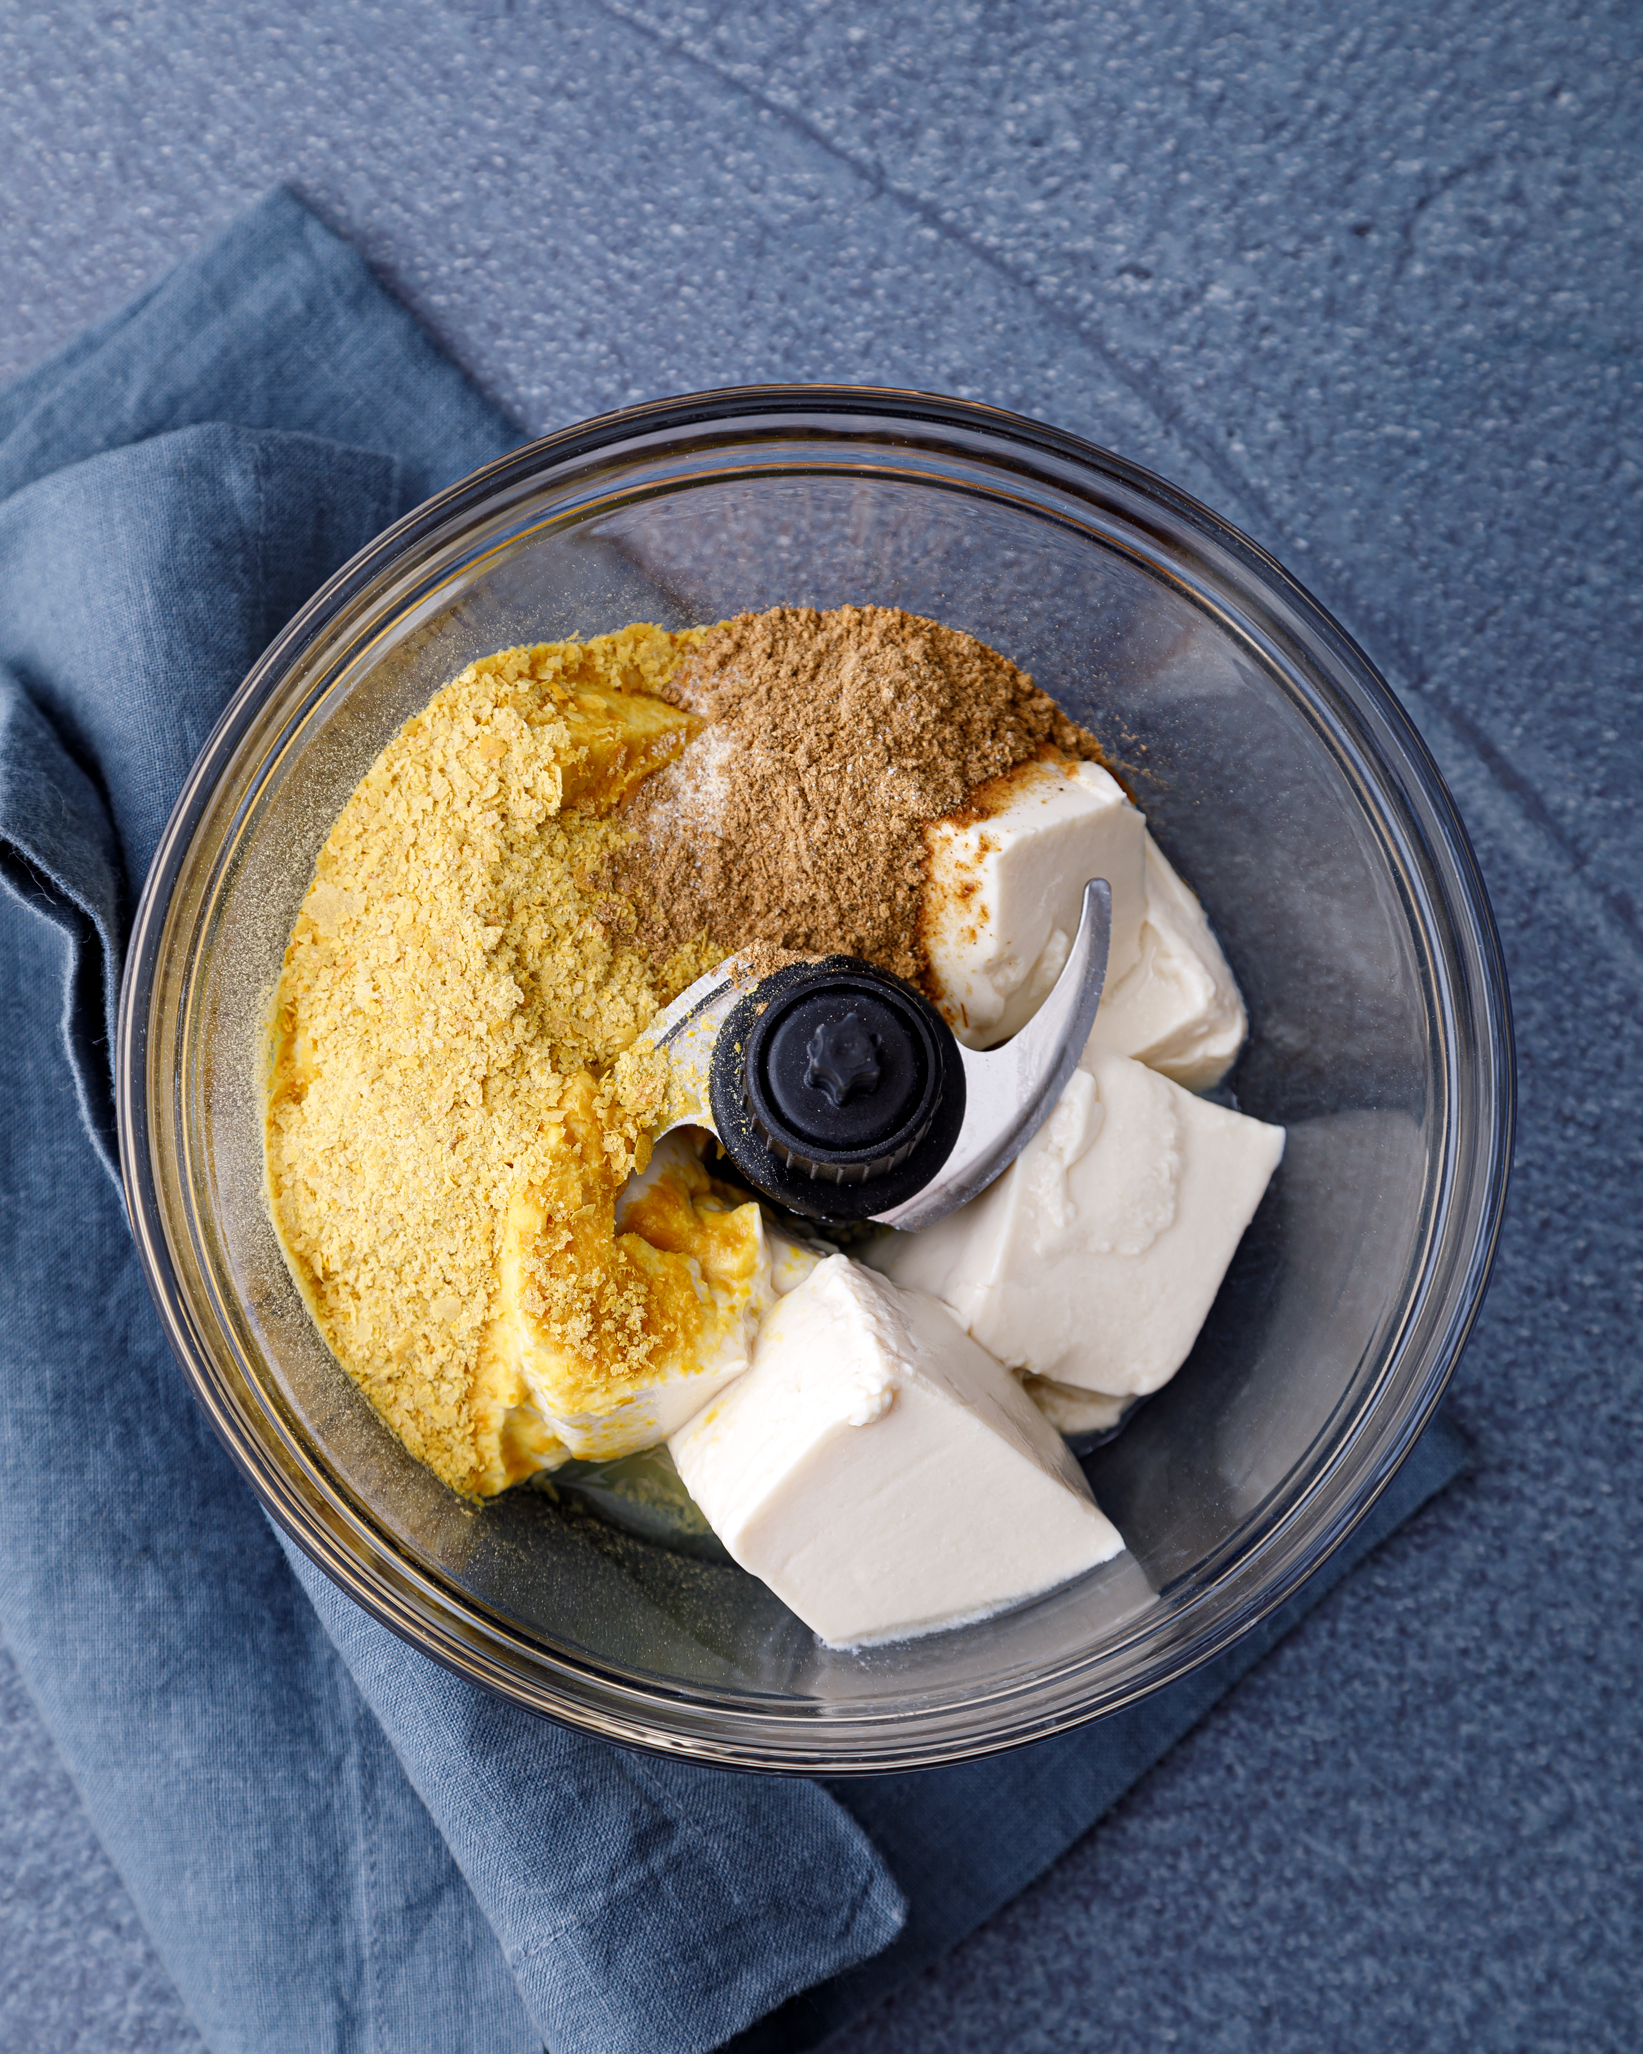 a food processor containing all the ingredients for. vegan, gluten free, nut free tofu queso. Tofu, nutritional yeast, cumin, coriander, onion powder and salt